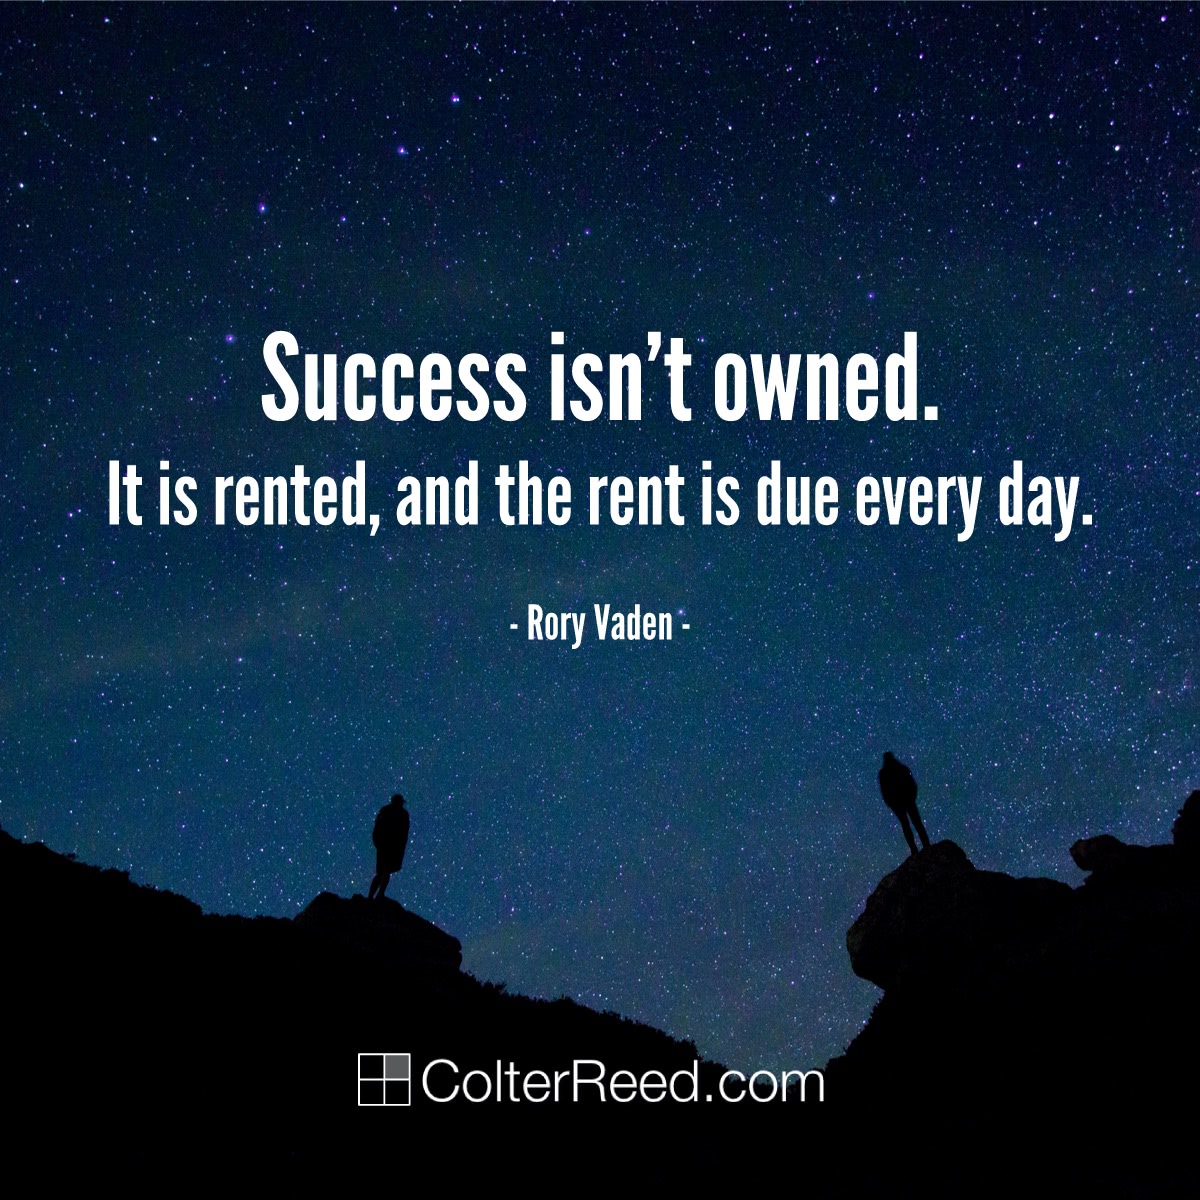 “Success isn’t owned. It is rented, and the rent is due every day.” —Rory Vaden